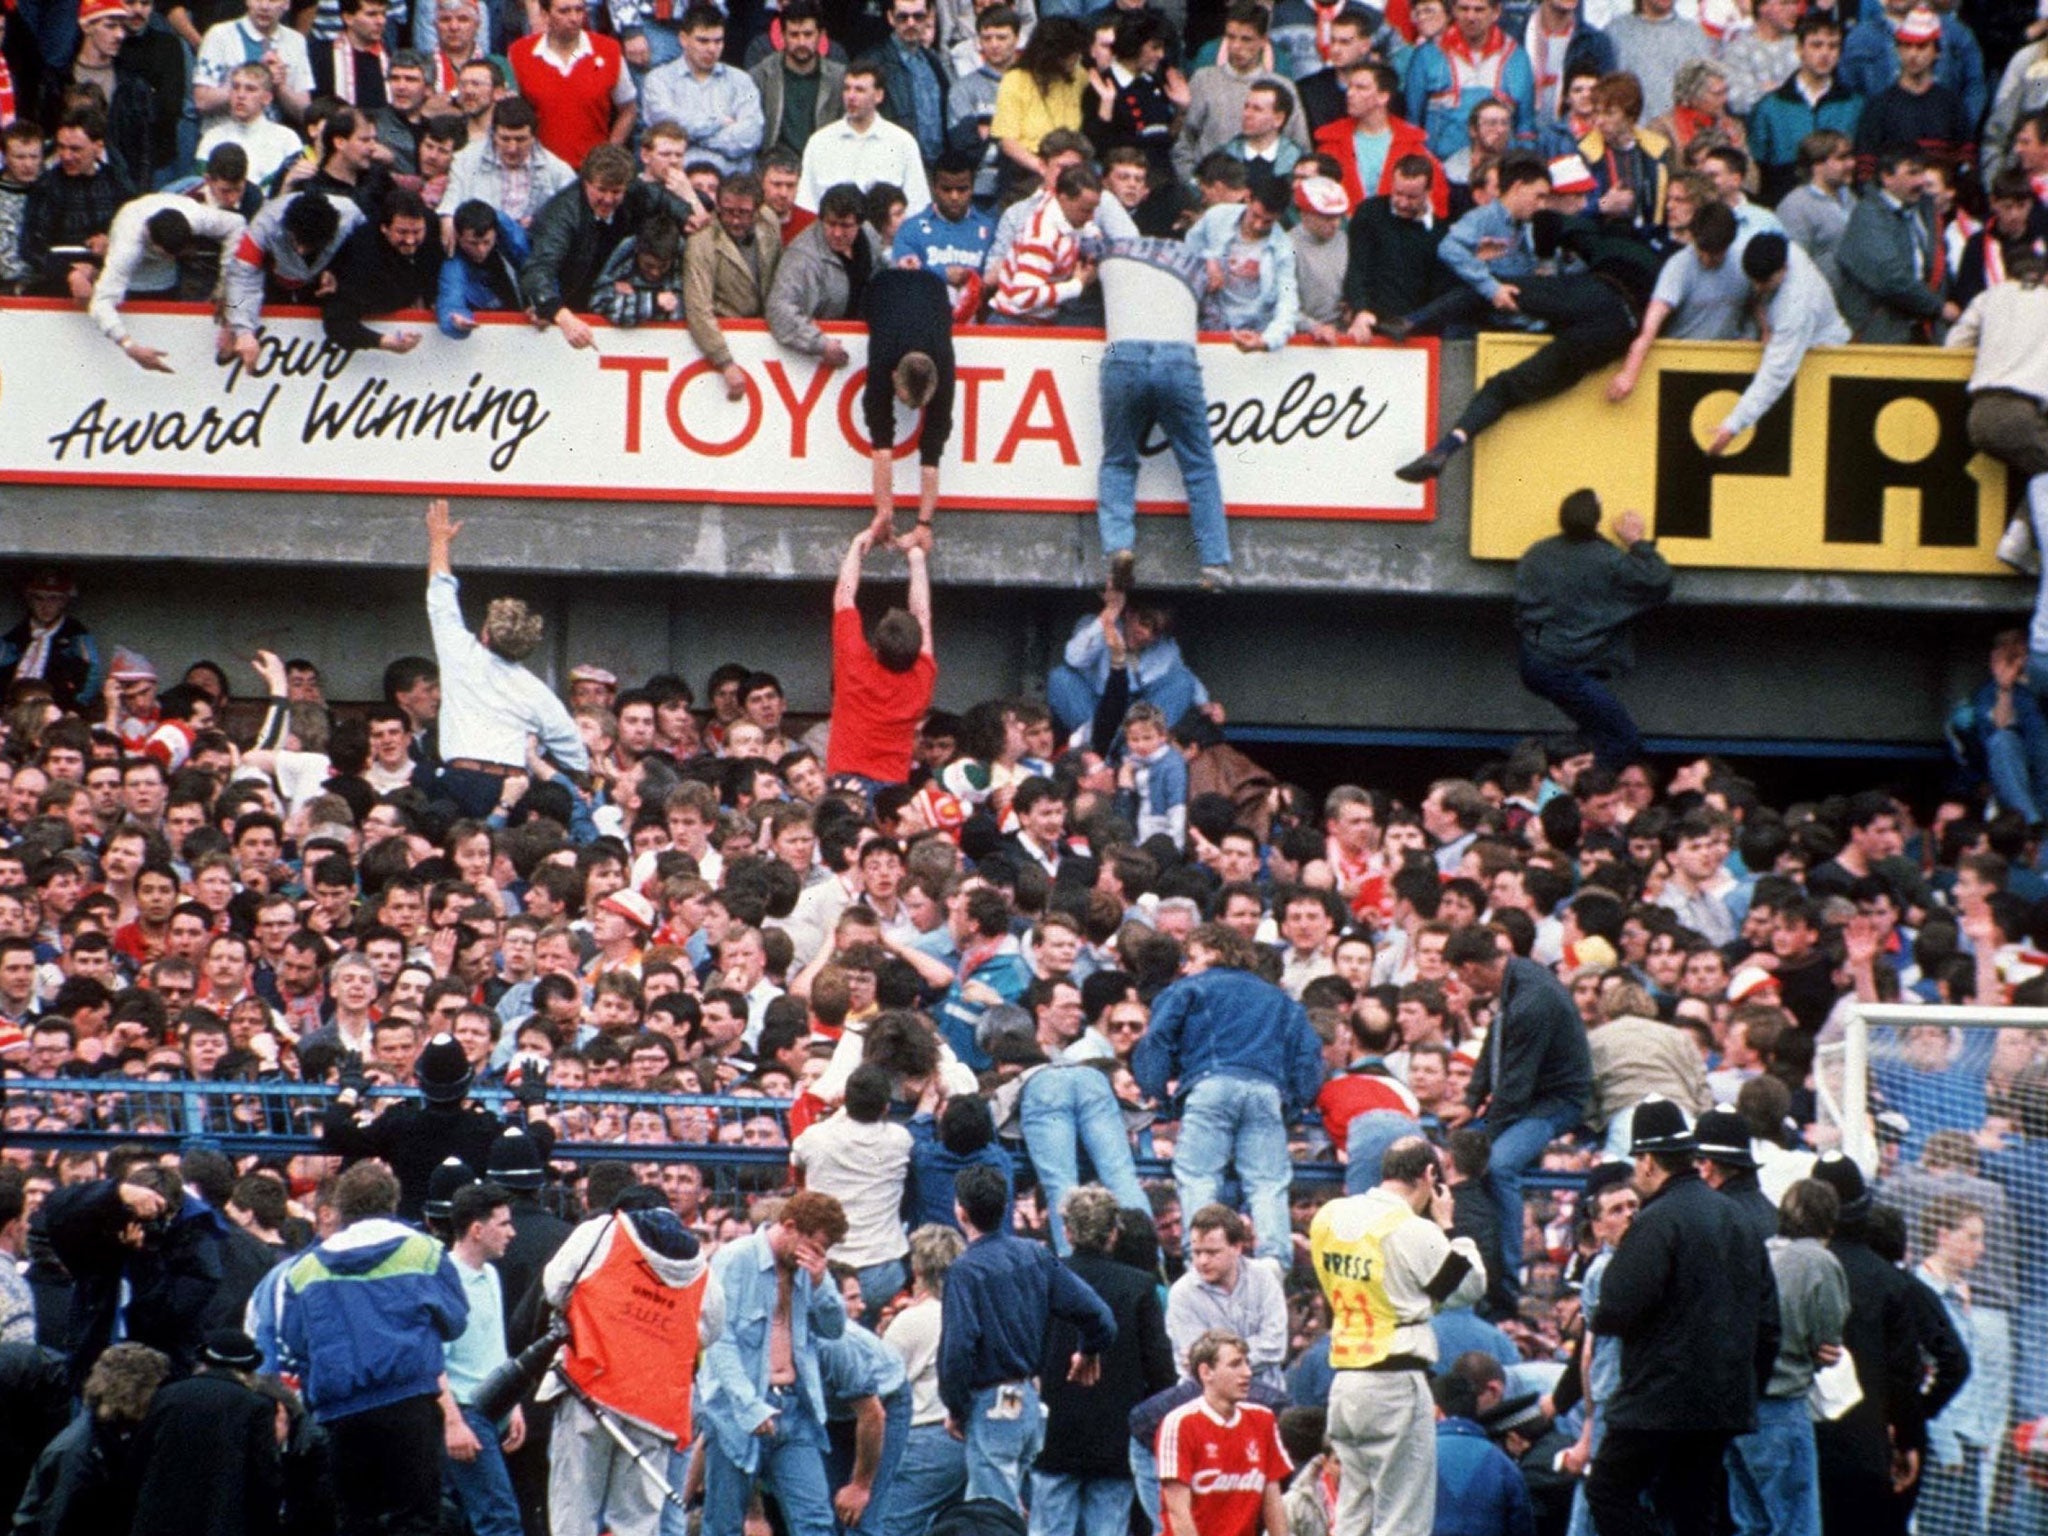 Officers from South Yorkshire Police accused Liverpool fans of stealing money from the bodies during the disaster in 1989